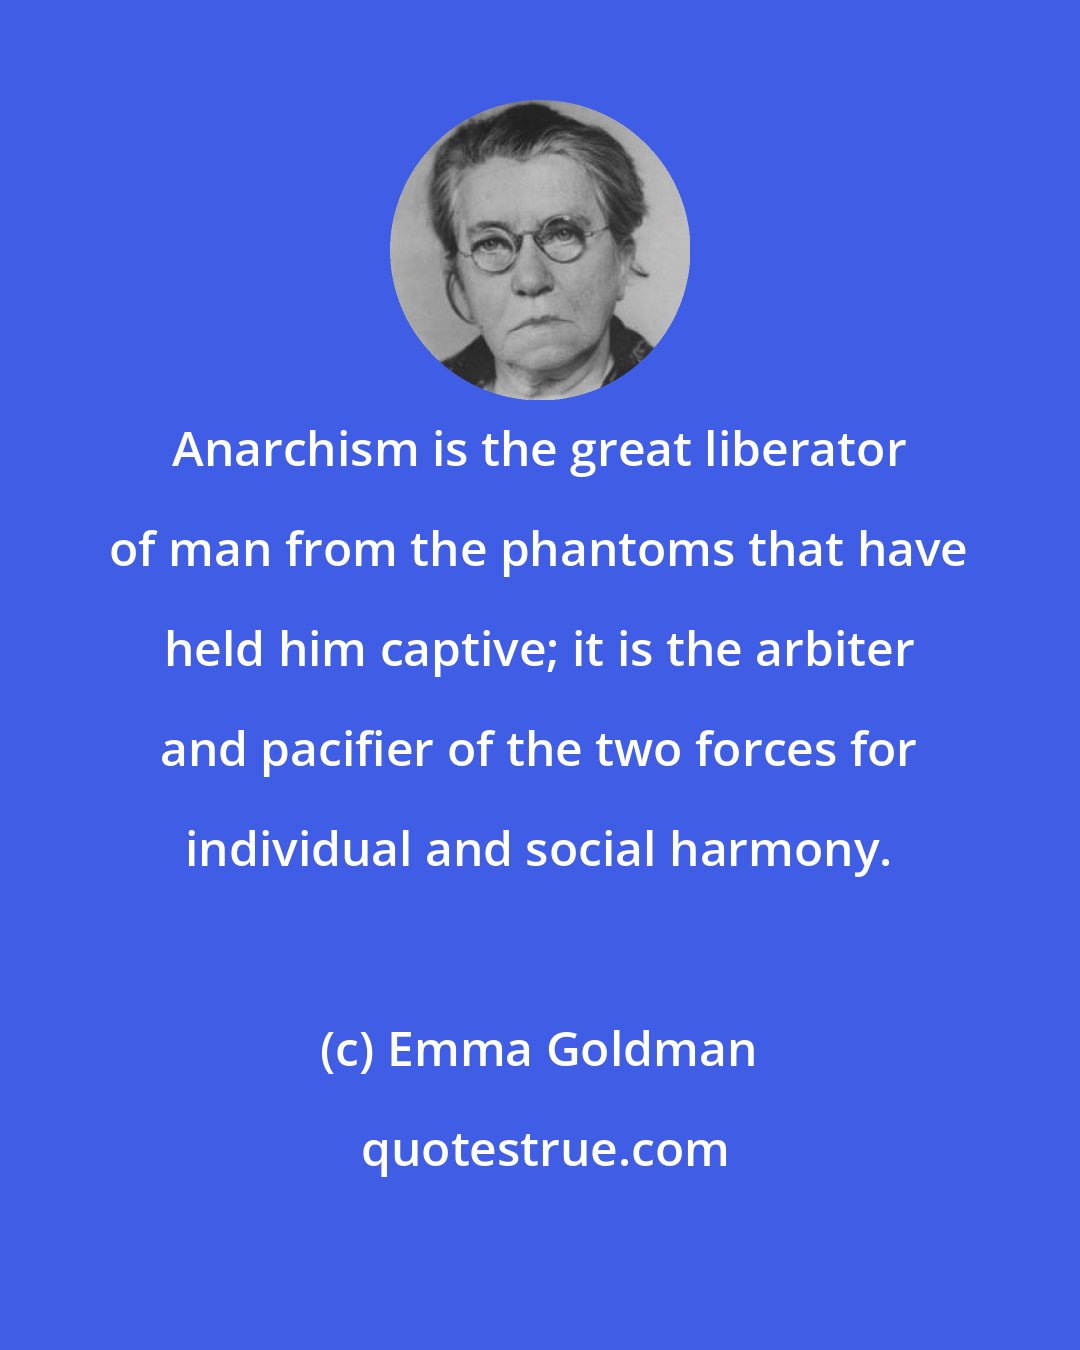 Emma Goldman: Anarchism is the great liberator of man from the phantoms that have held him captive; it is the arbiter and pacifier of the two forces for individual and social harmony.